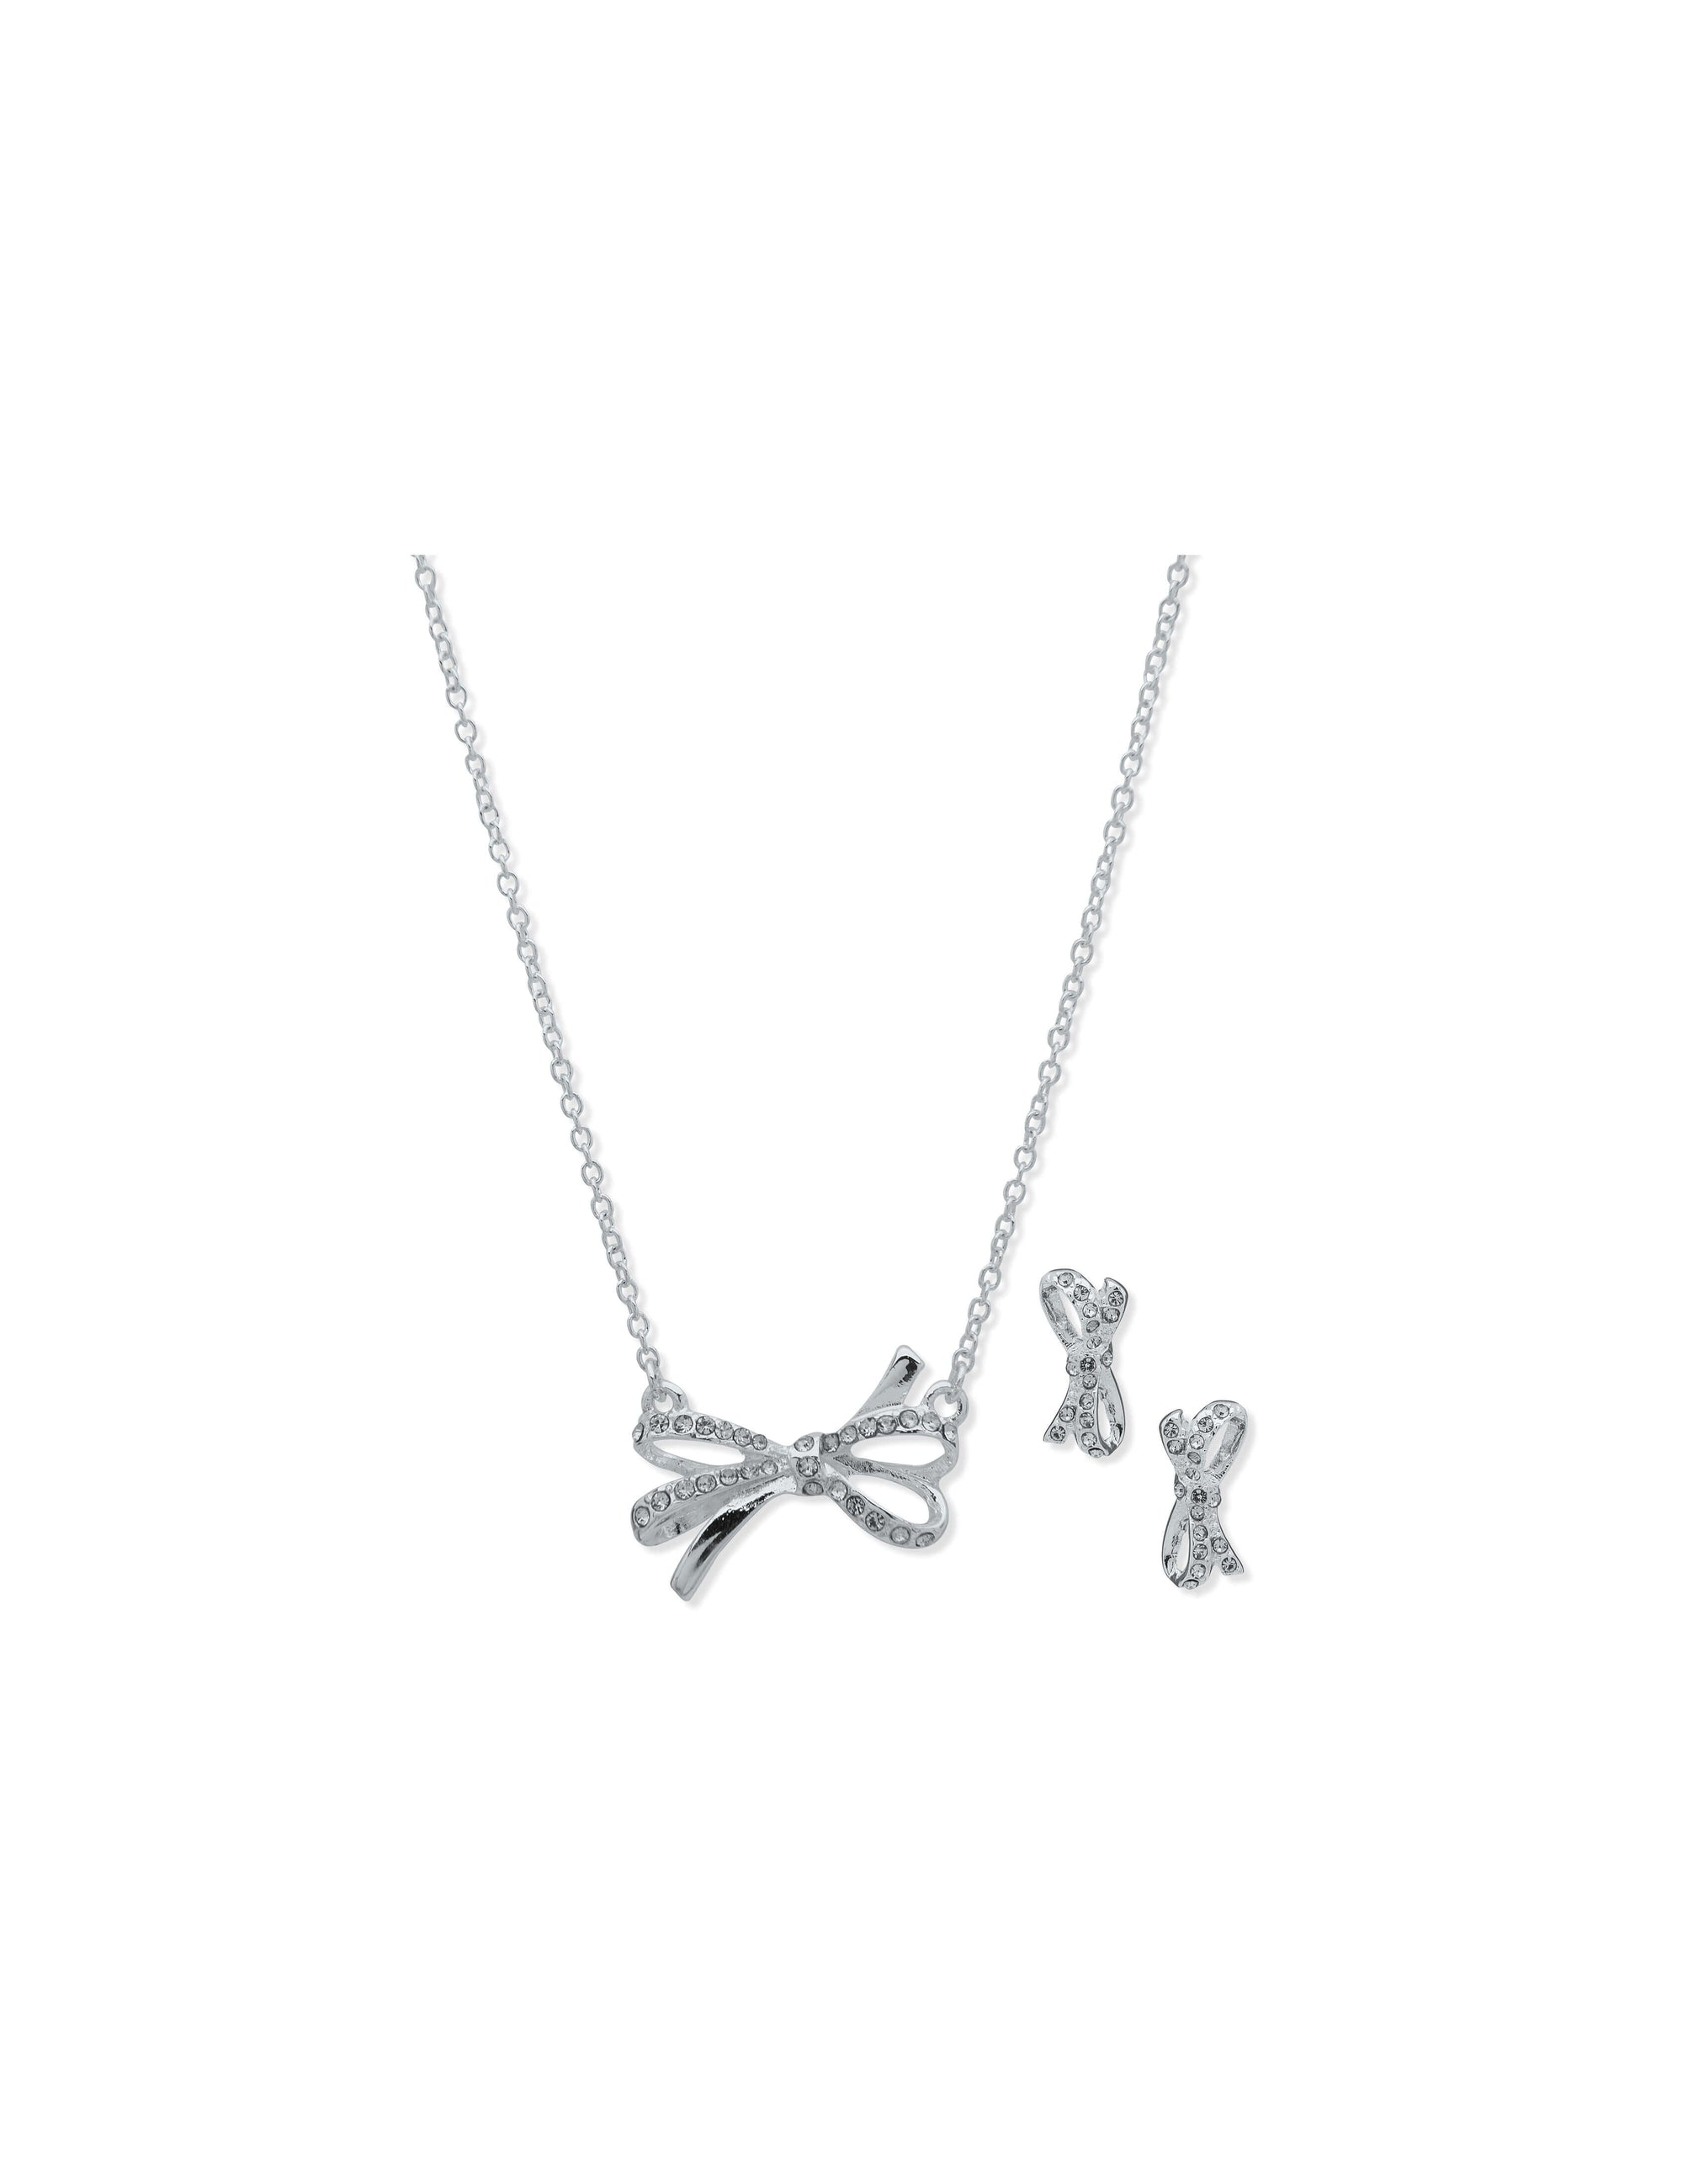 Bow Necklaces, Rings, Earrings: How To Channel The Bow Jewelry